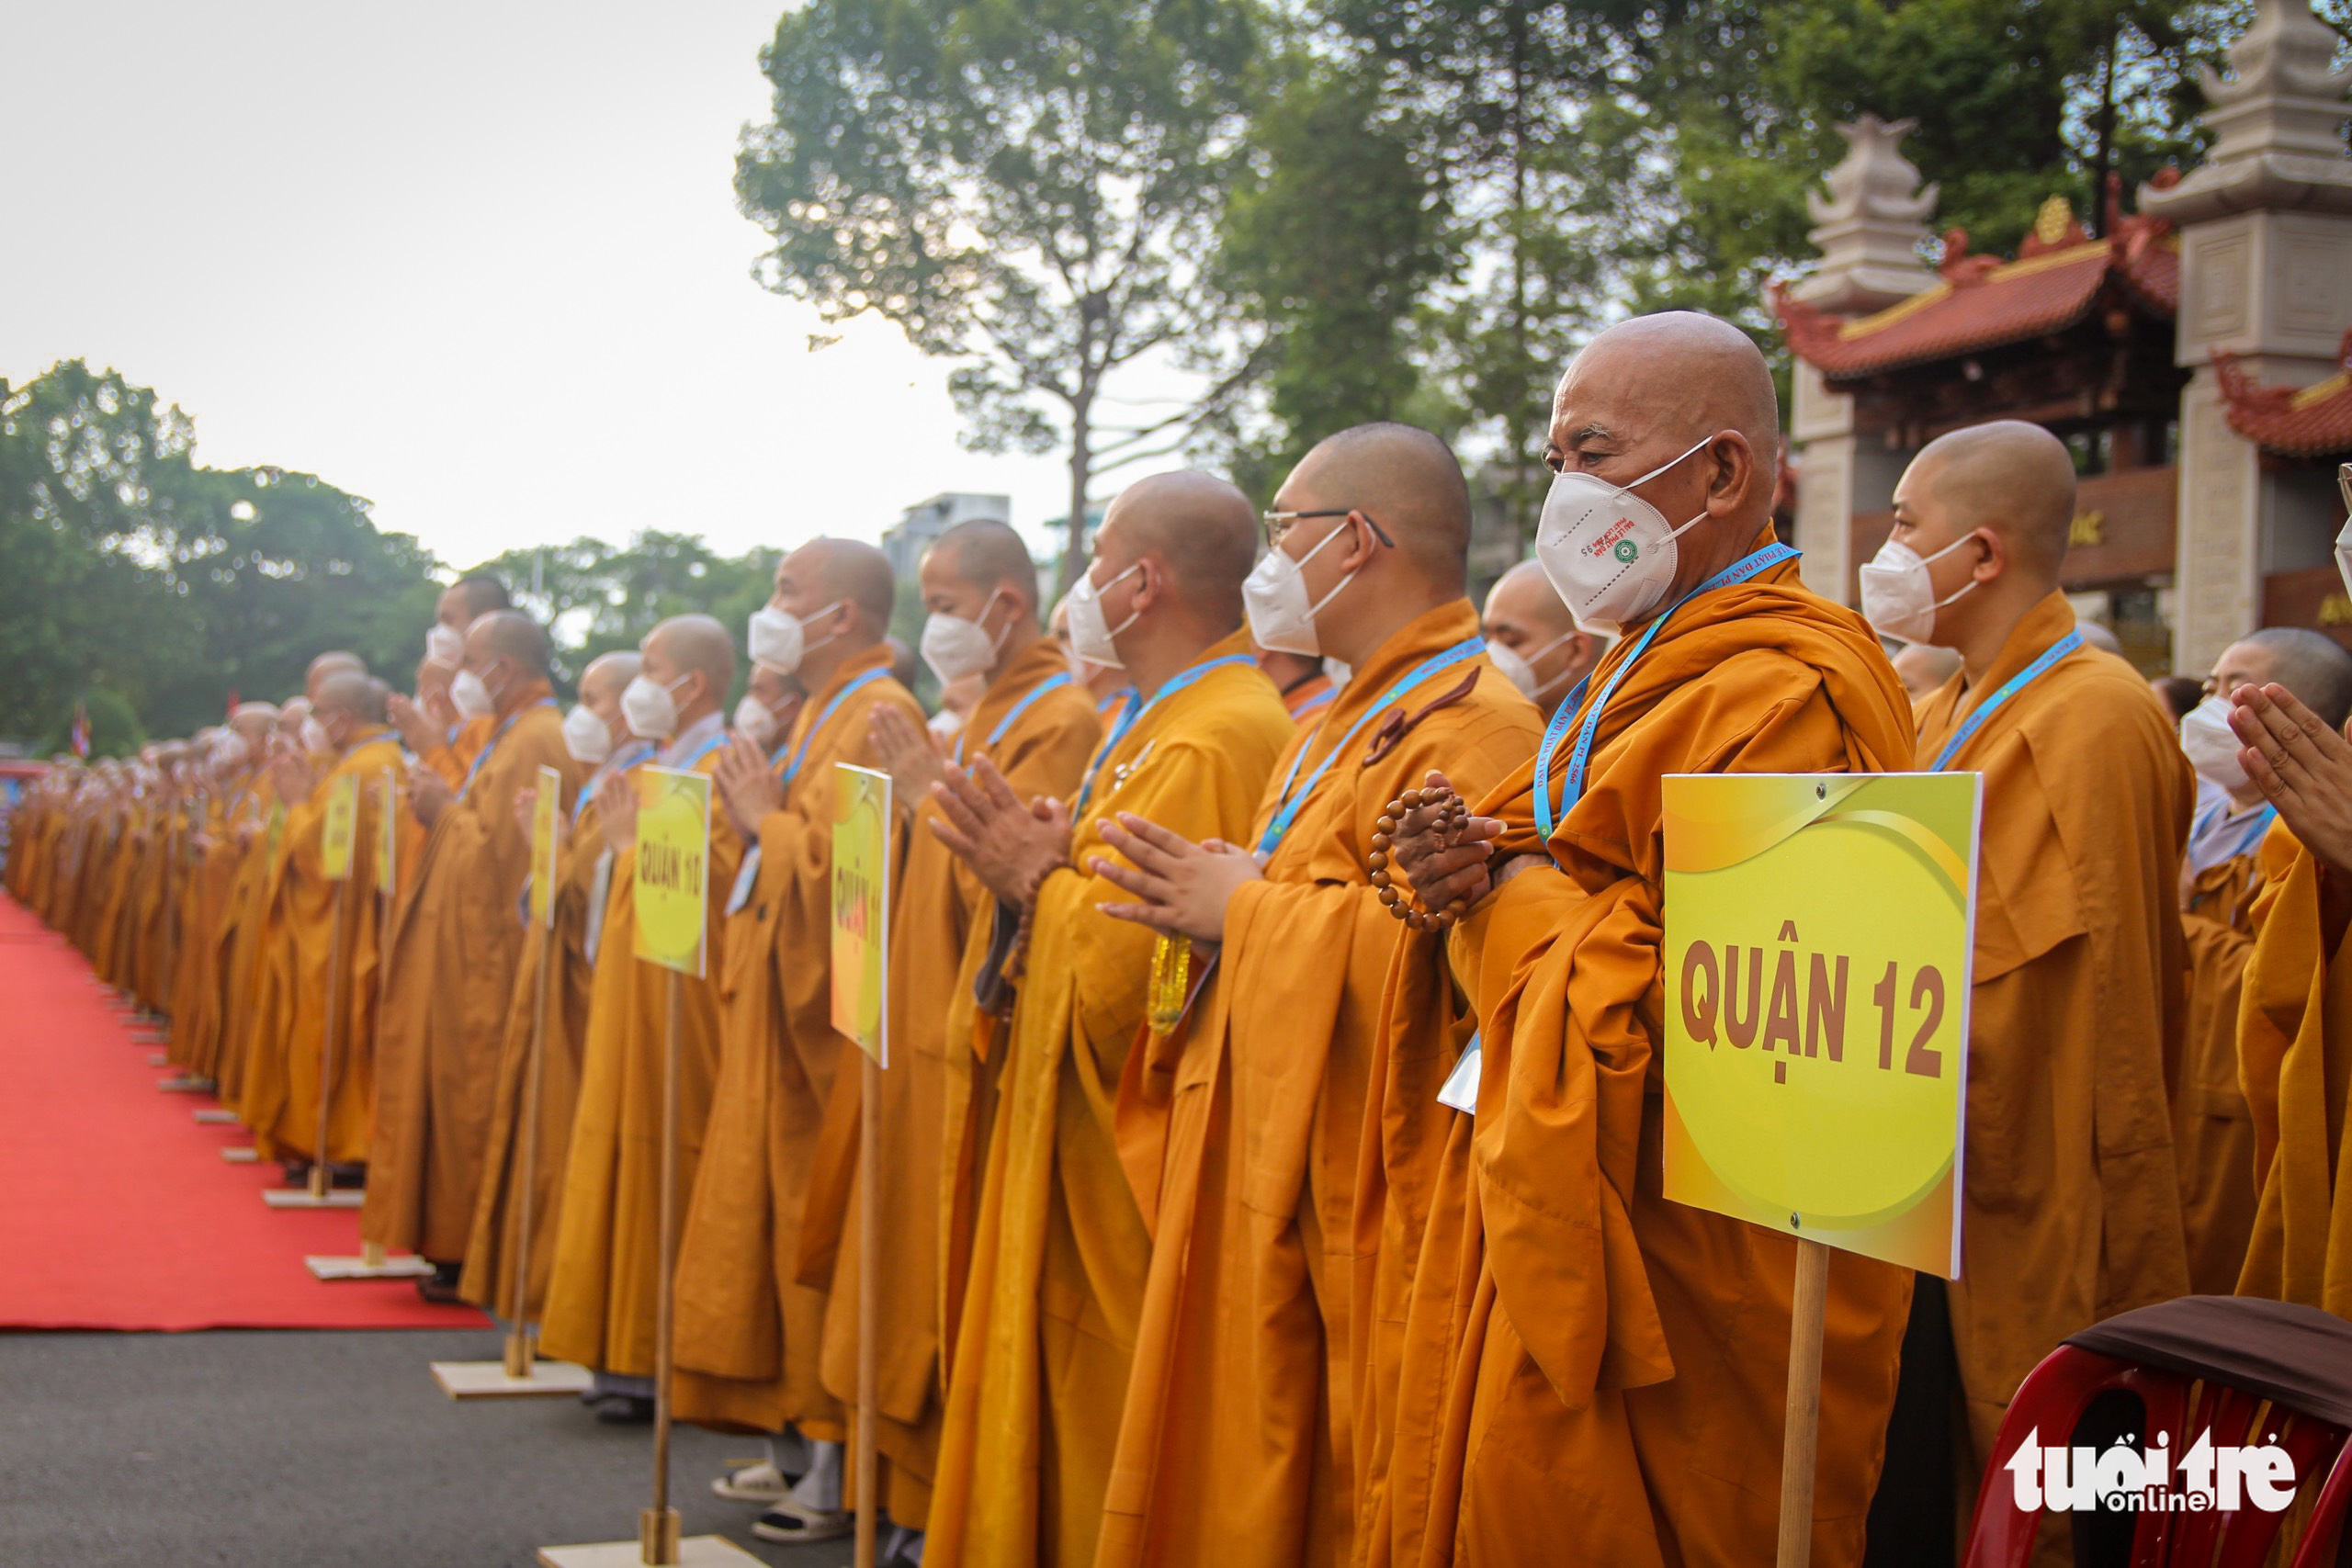 Buddhist monks attend the ceremony marking the 2566th Buddha’s Birthday at Vietnam Quoc Tu Pagoda in District 10, Ho Chi Minh City, May 15, 2022. Photo: Phuong Quyen / Tuoi Tre